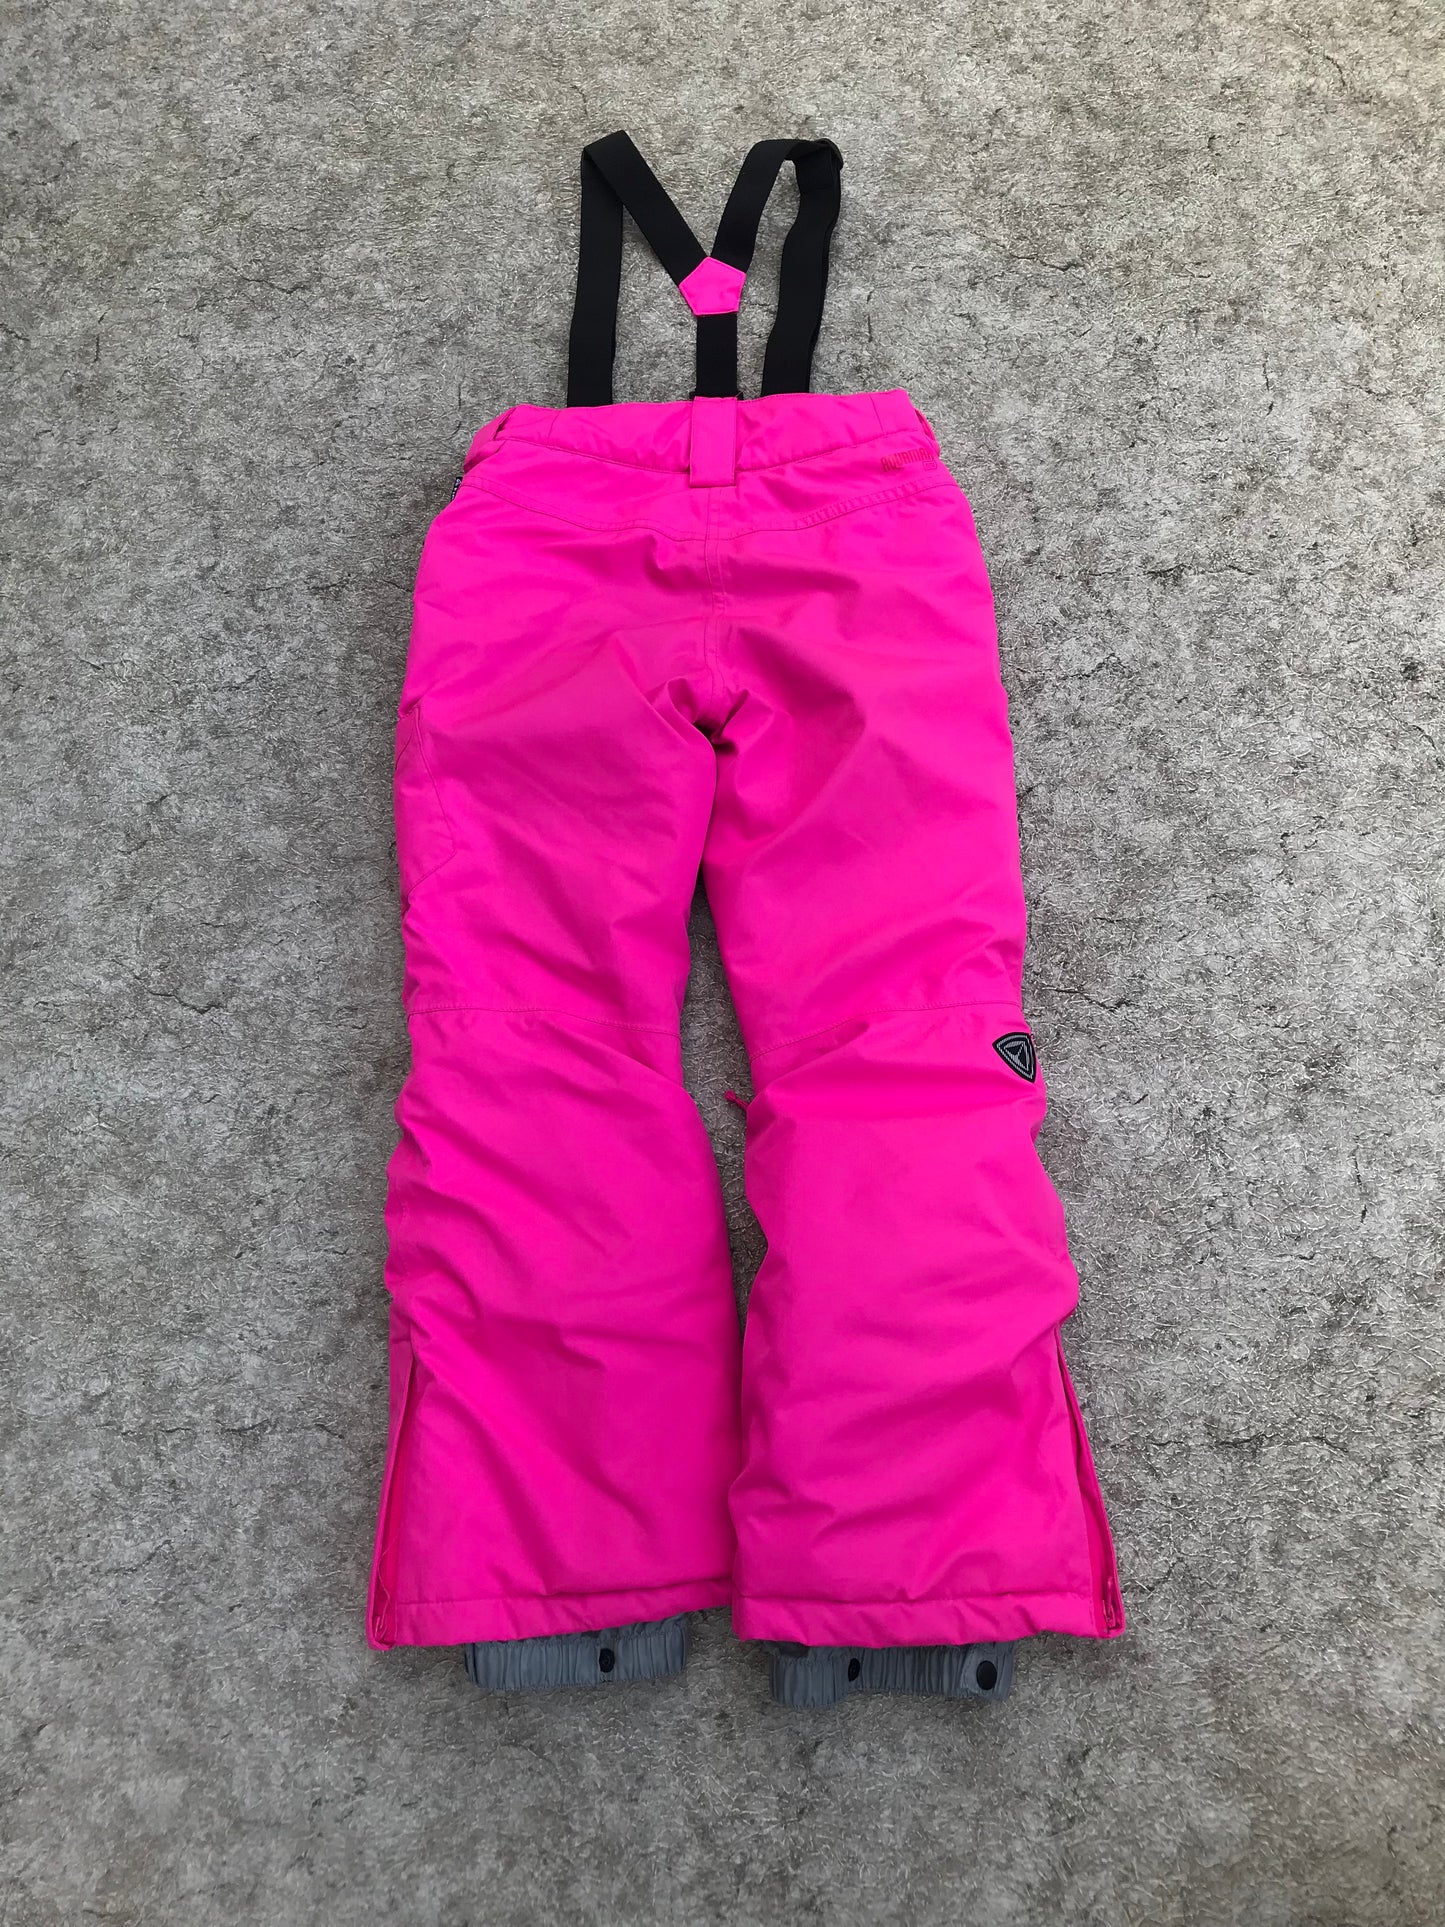 Snow Pants Child Size 8-10 Firefly Fushia Black With Suspenders Excellent